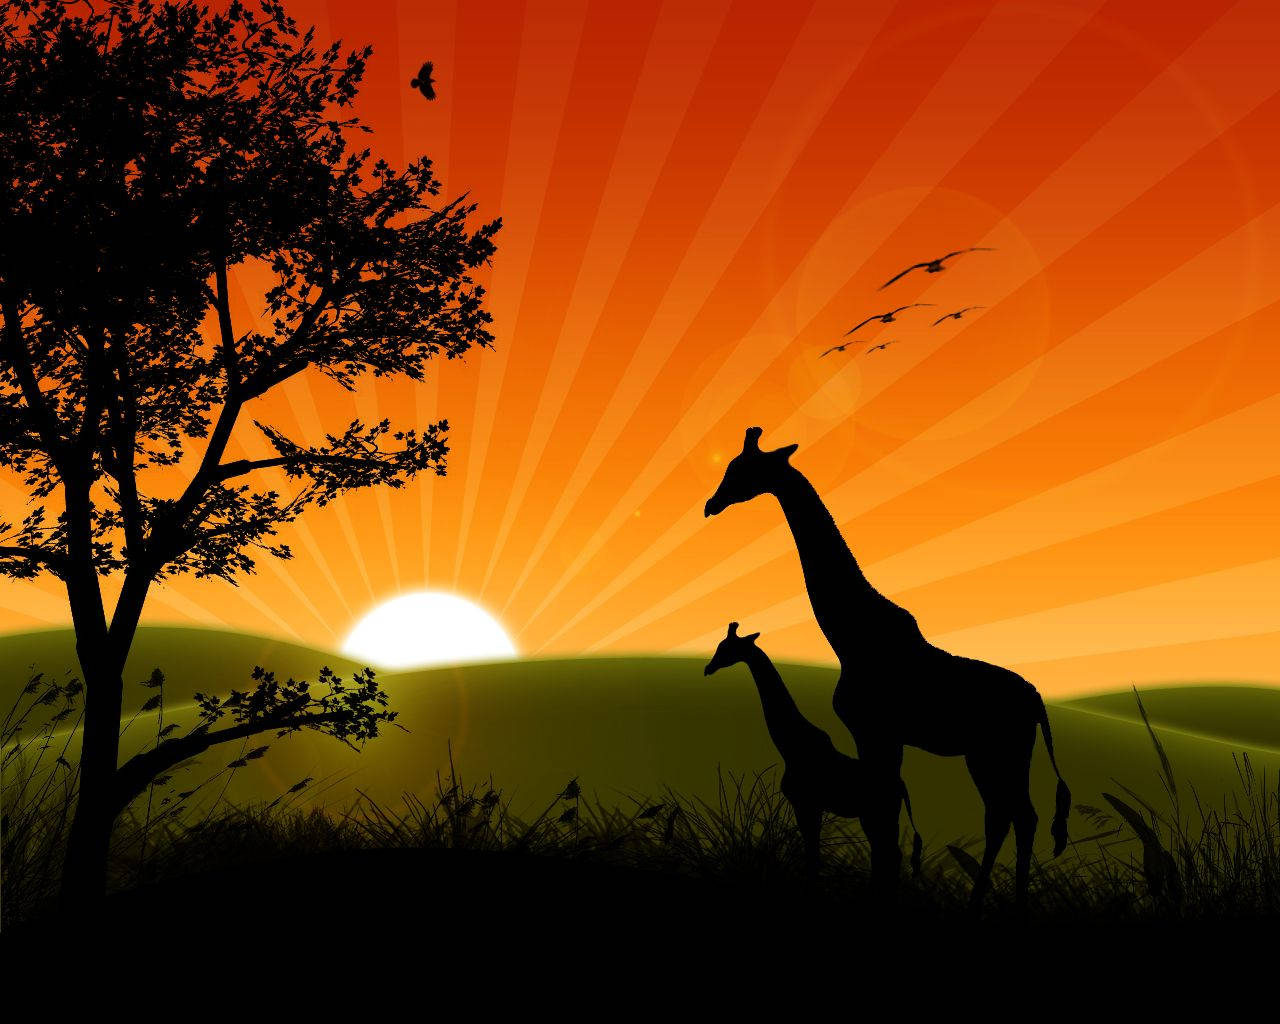 Rising Sun With Two Giraffes